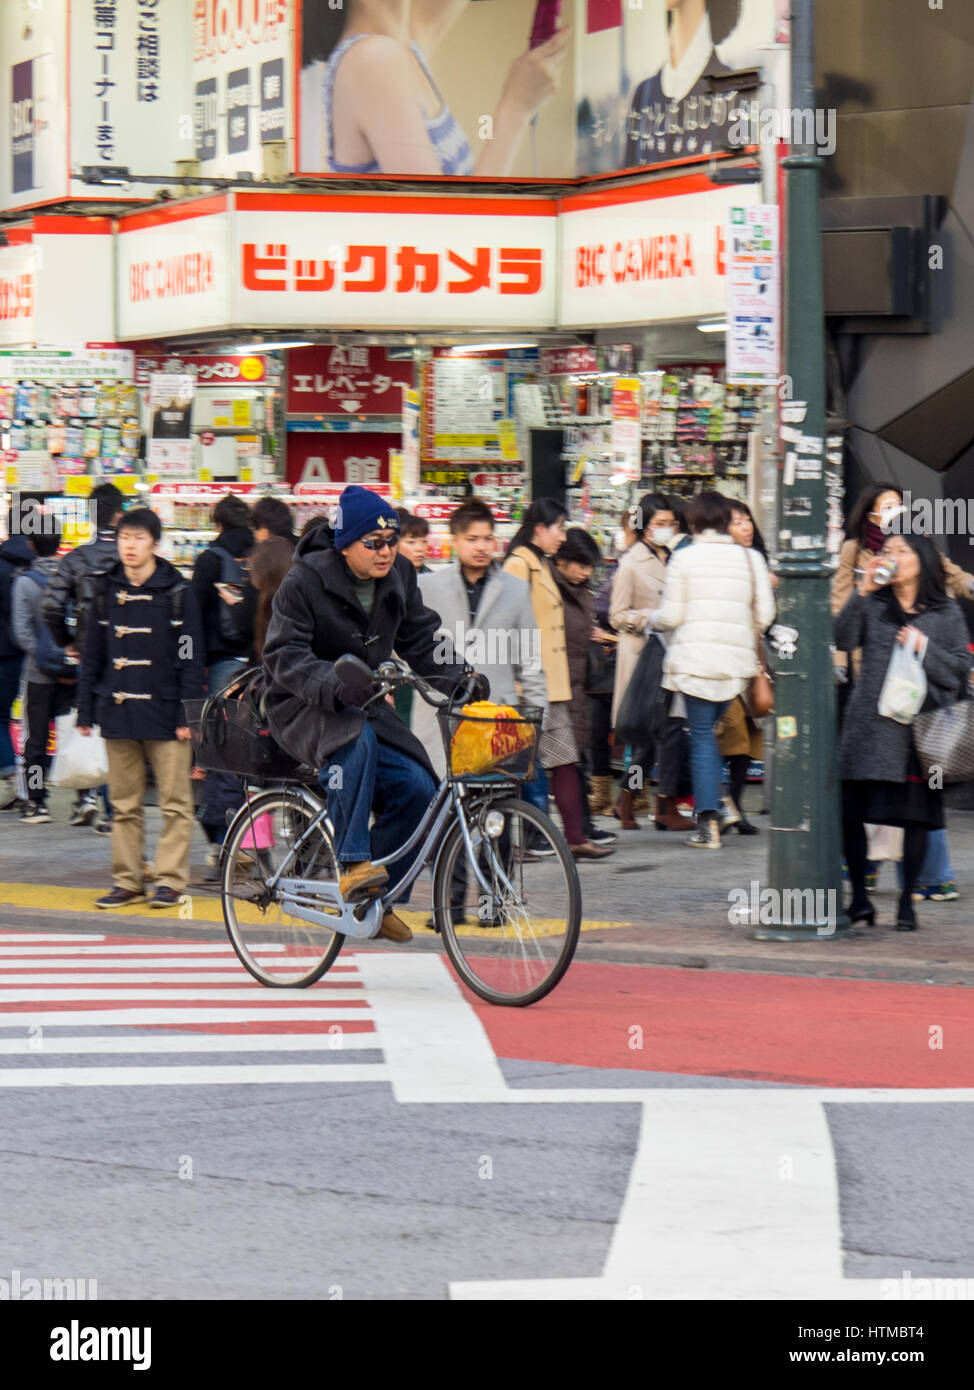 A cyclist cycling across a busy intersection in Shibuya, Tokyo Japan. Stock Photo